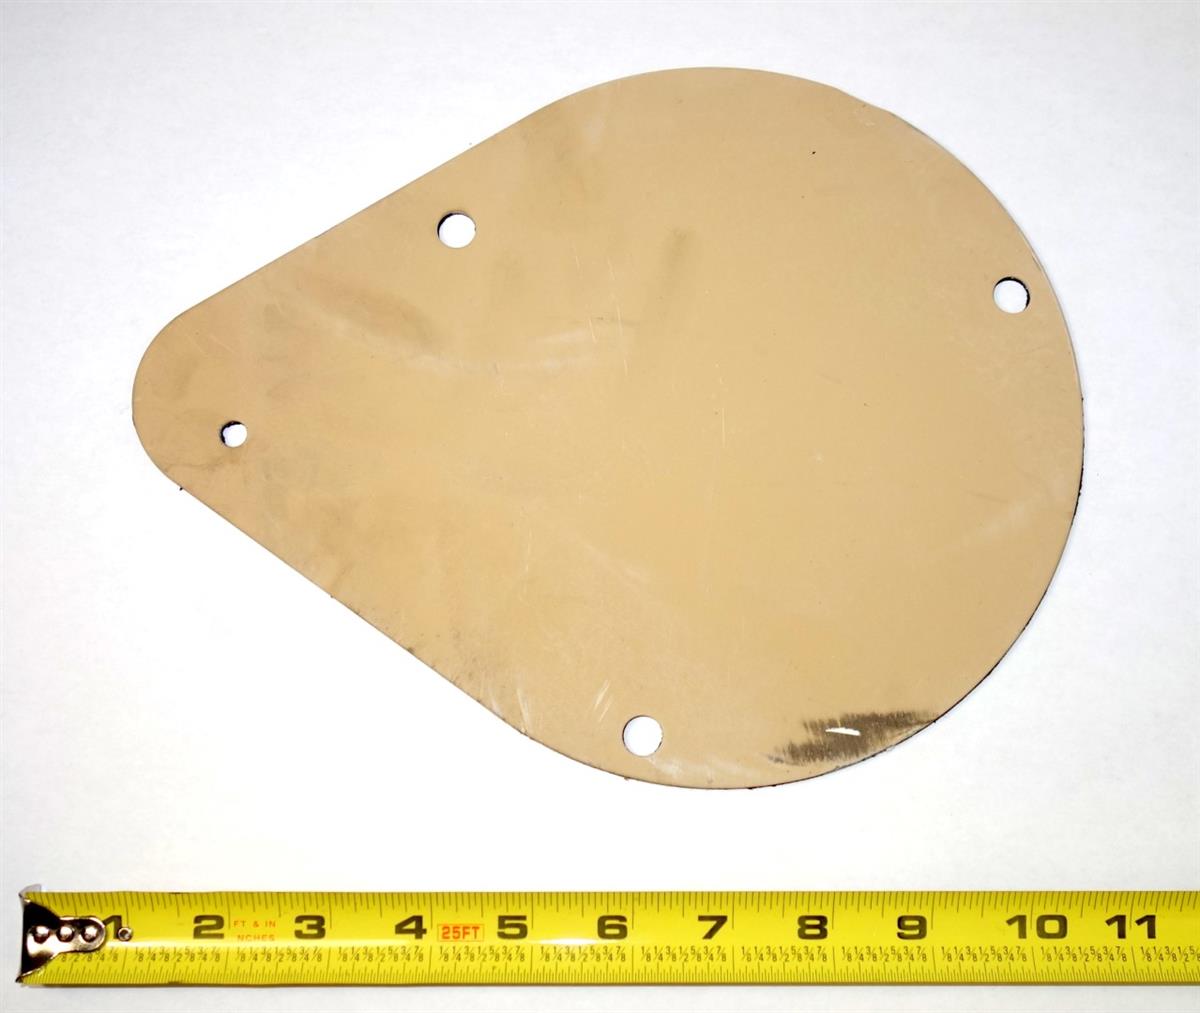 HM-781 | 5342-01-268-0921 Weapons Station Cover Assembly for HMMWV NOS (2).JPG